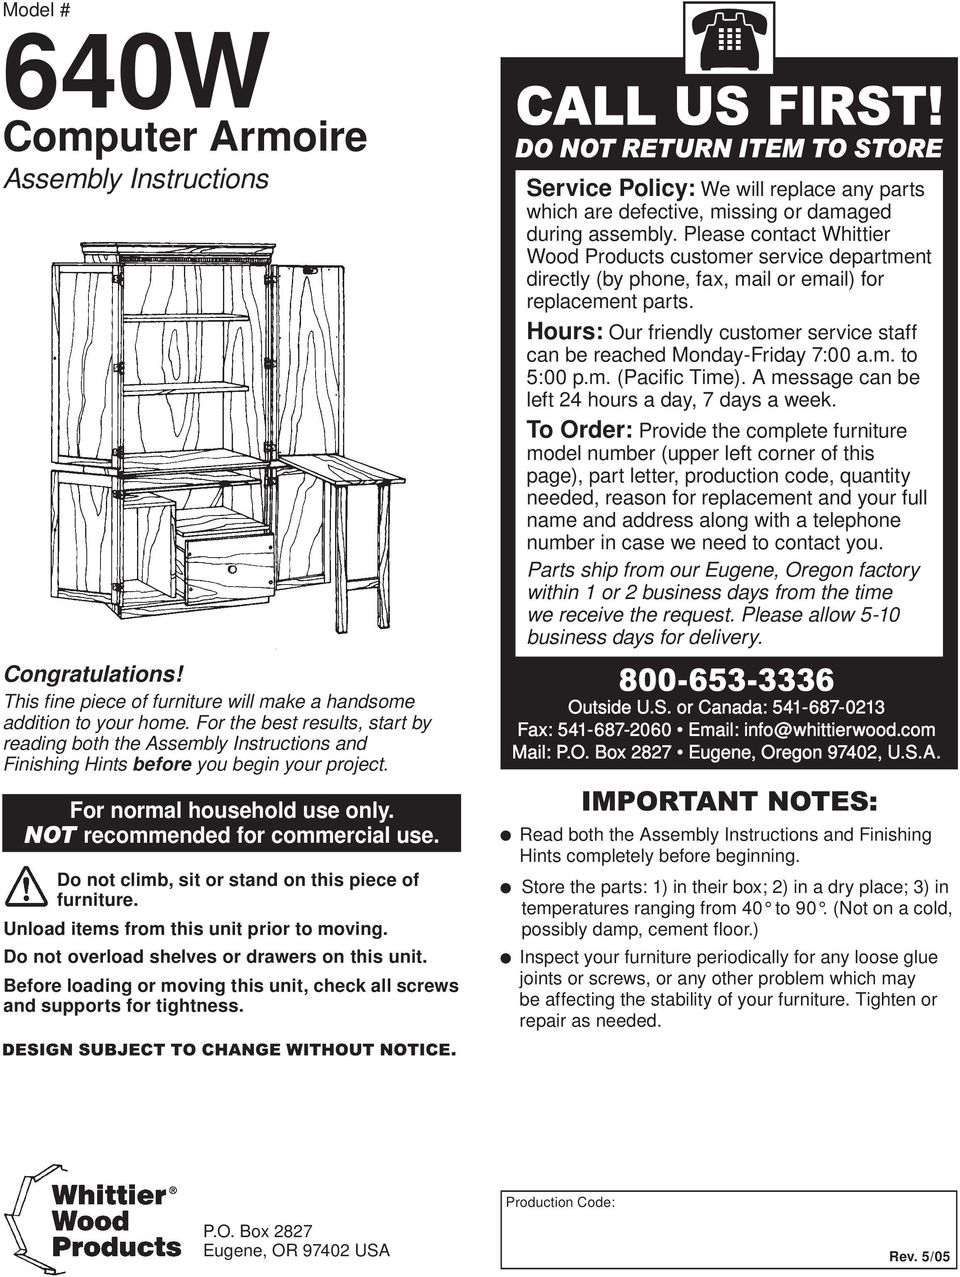 Do not climb, sit or stand on this piece of furniture. Unload items from this unit prior to moving. Do not overload shelves or drawers on this unit.